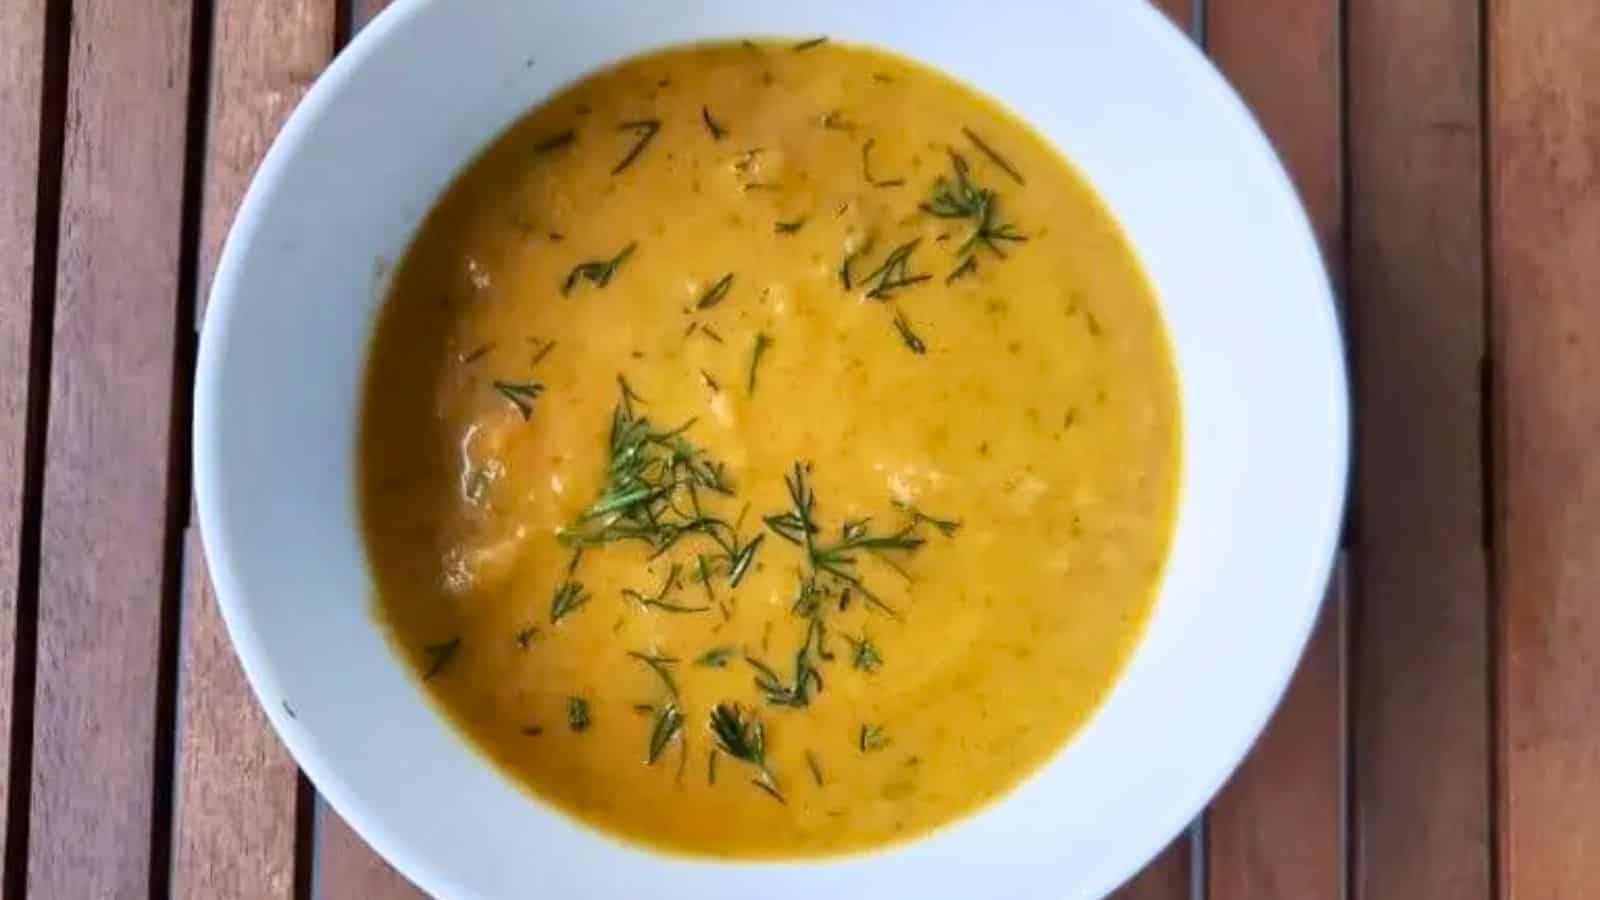 Image shows A bowl of carrot chicken soup on a wooden table.